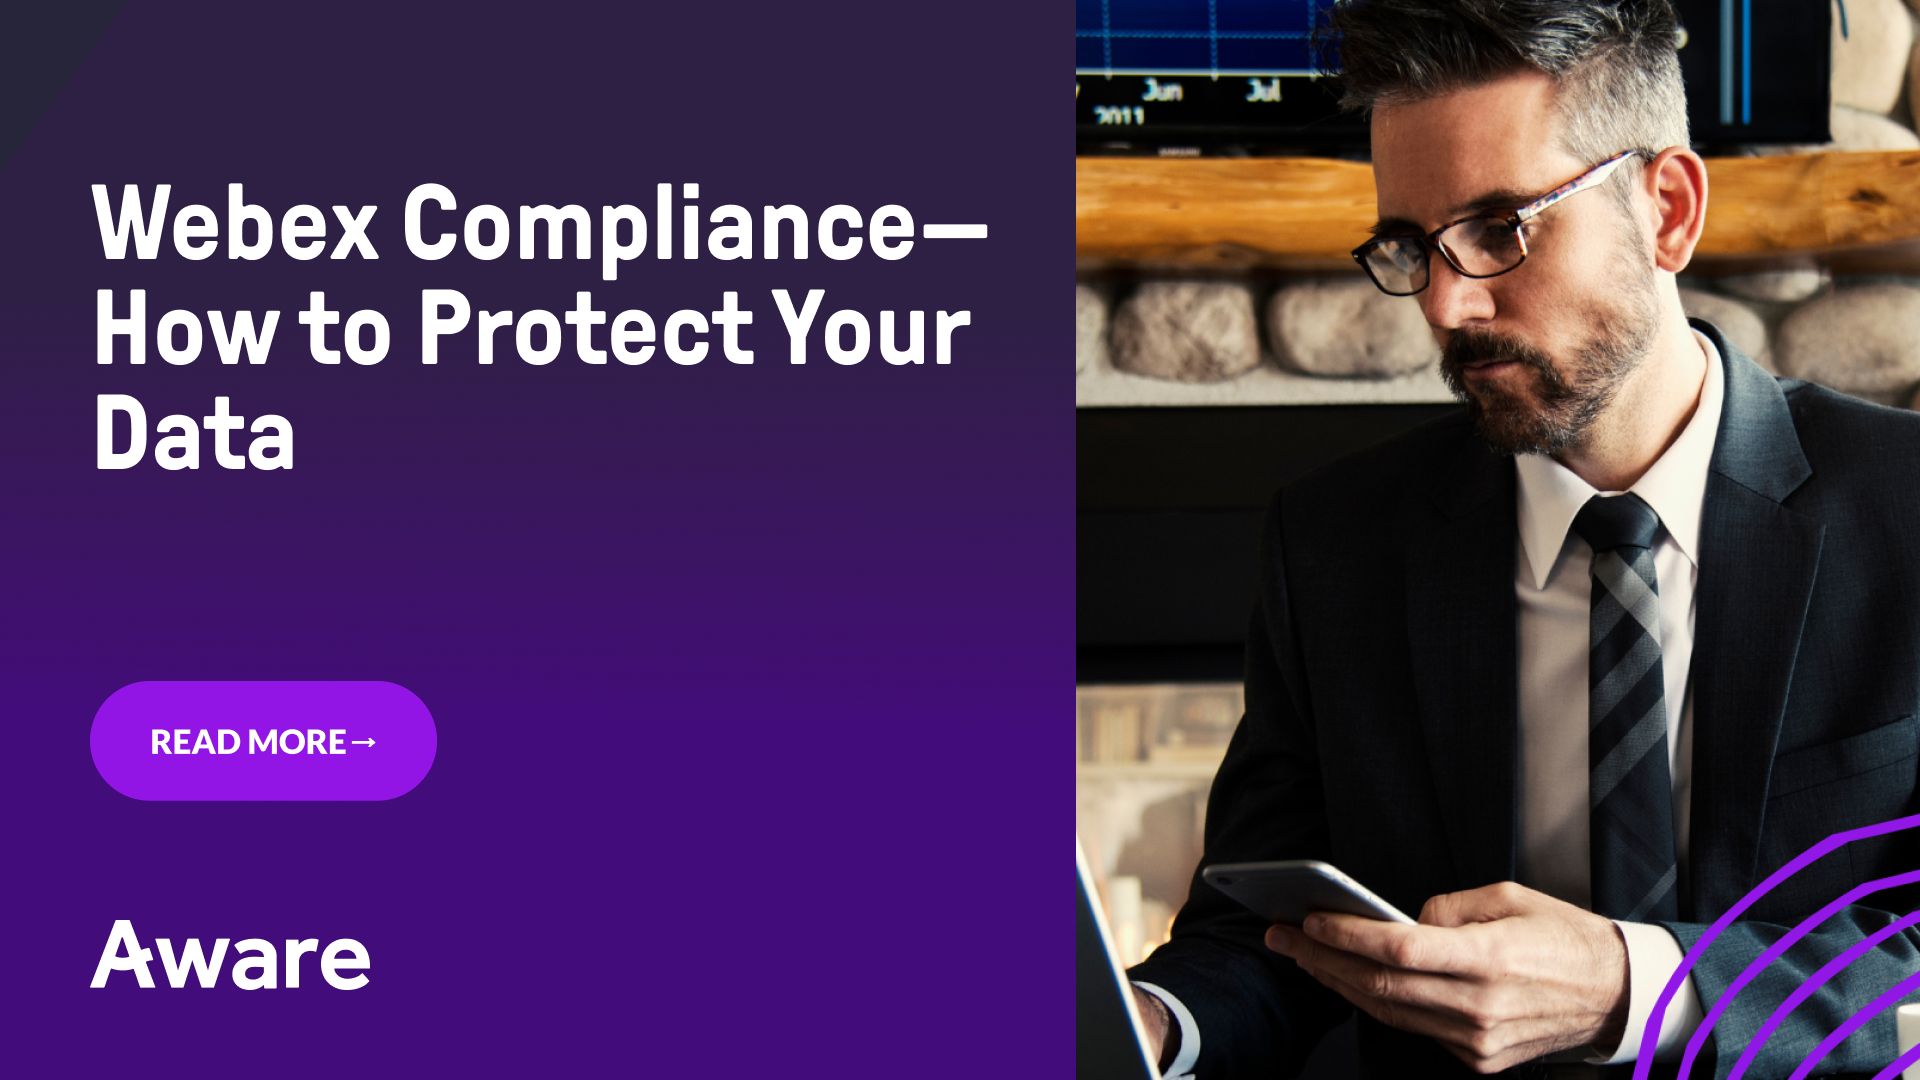 Webex Compliance—How to Protect Your Data